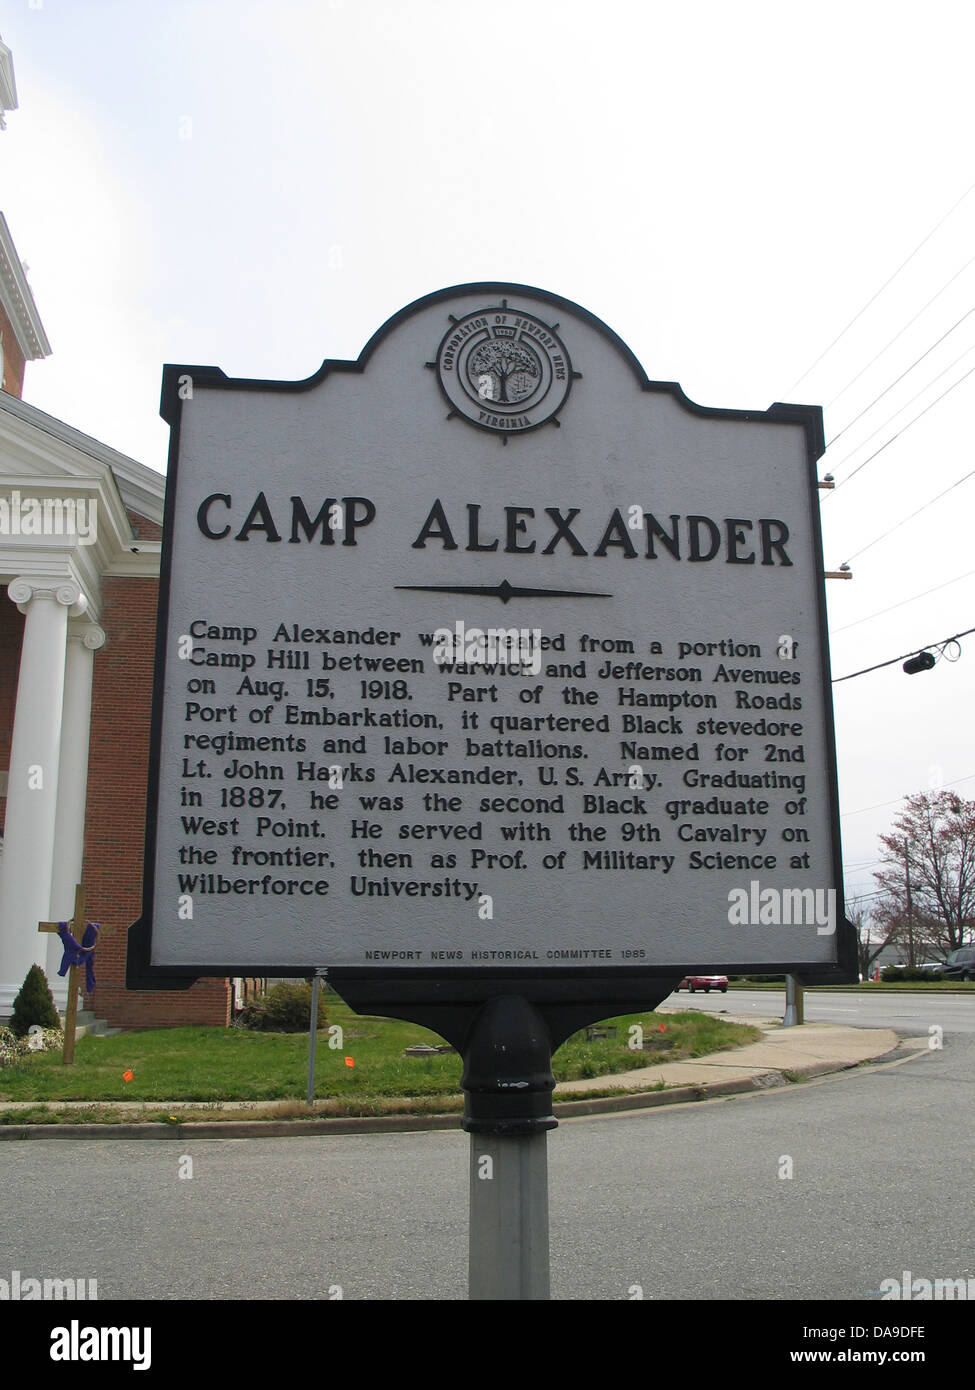 CAMP ALEXANDER Camp Alexander was created from a portion of Camp Hill between Warwick and Jefferson Avenues on Aug. 15, 1918. Part of the Hampton Roads Port of Embarkation, it quartered Black stevedore regiments and labor battalions. Named for 2nd Lt. John Hawks Alexander, U.S. Army. Graduating in 1887, he was the second Black graduate of West Point. He served with the 9th Cavalry on the frontier, then as Prof. of Military Science at Wilberforce University. Newport News Historical Committee, 1985 Stock Photo